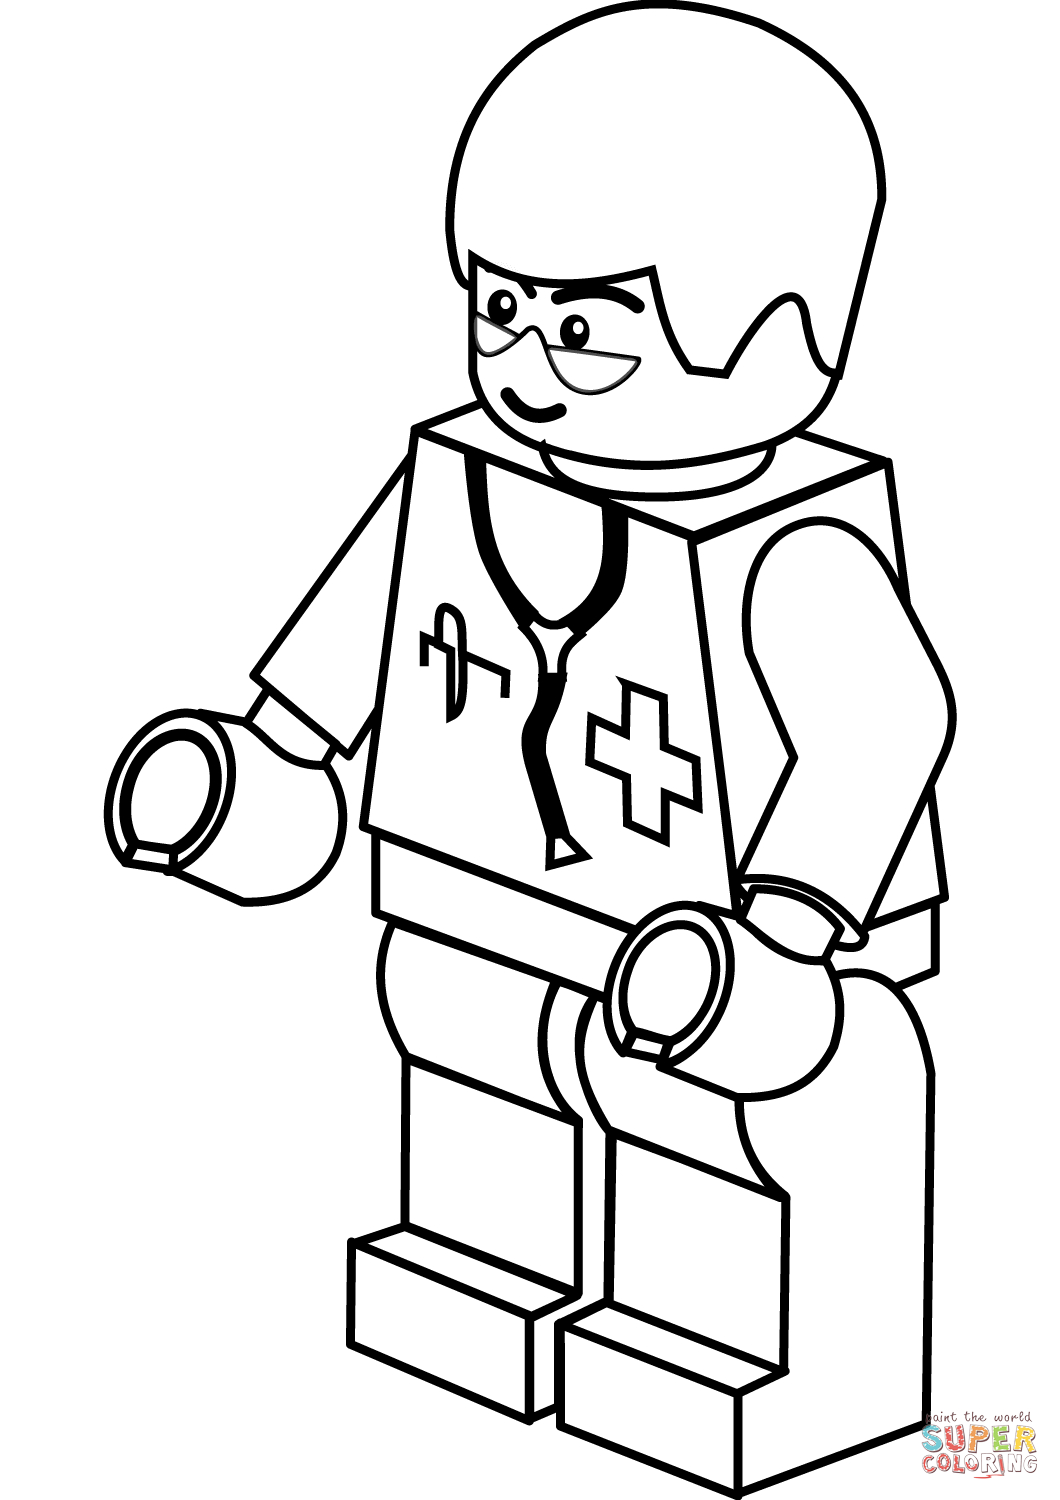 Lego Doctor Coloring Page | Free Printable Coloring Pages | Lego - Doctor Coloring Pages Free Printable